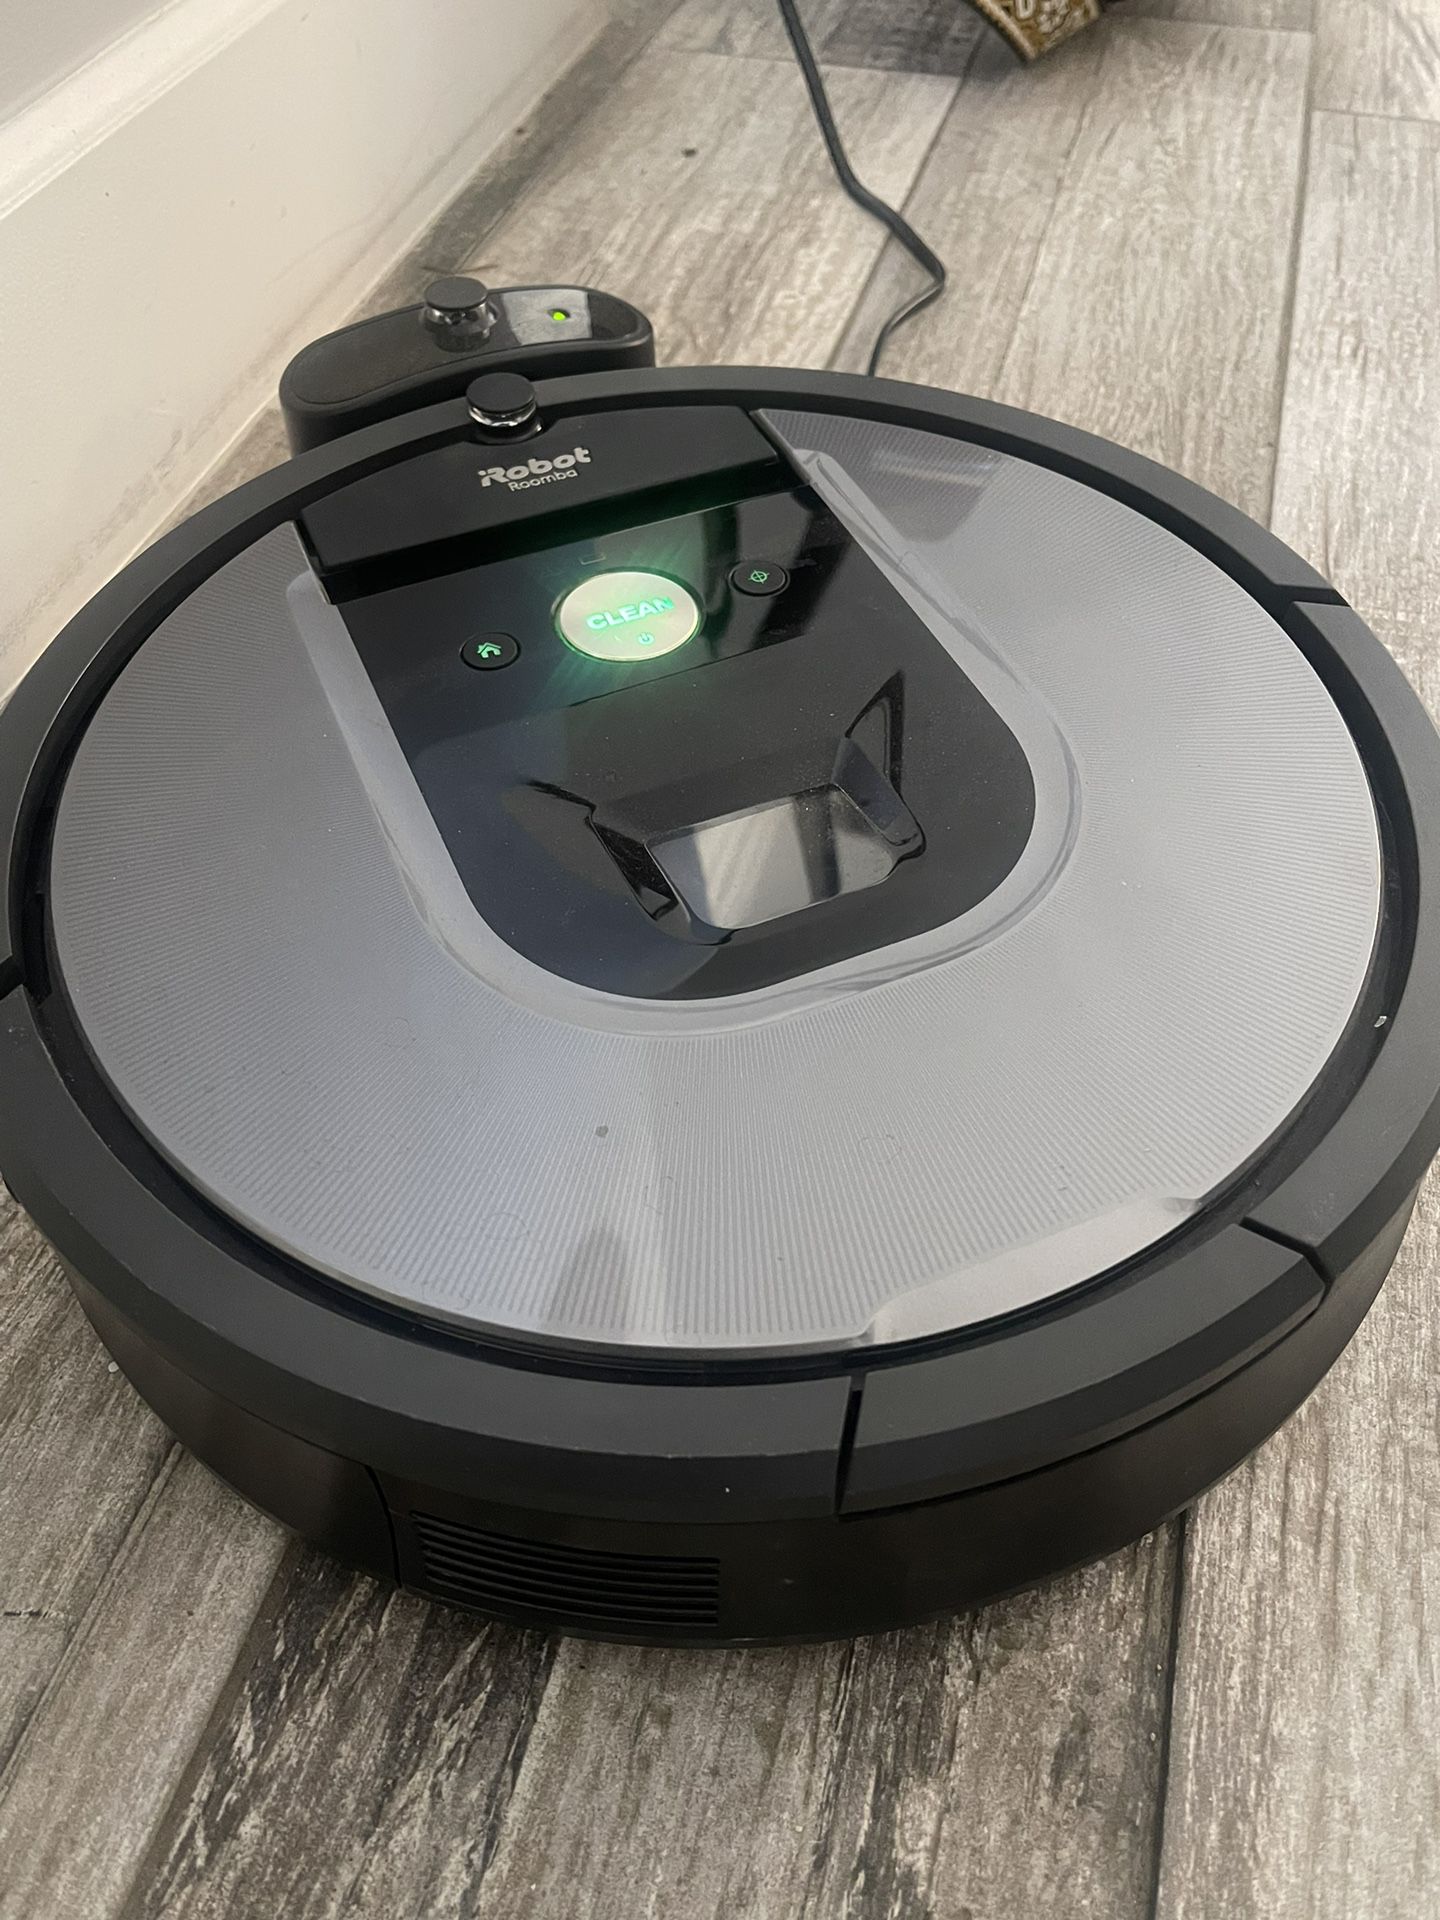 Roomba 960 With Wi-Fi Mapping Technology Works With Alexa!!